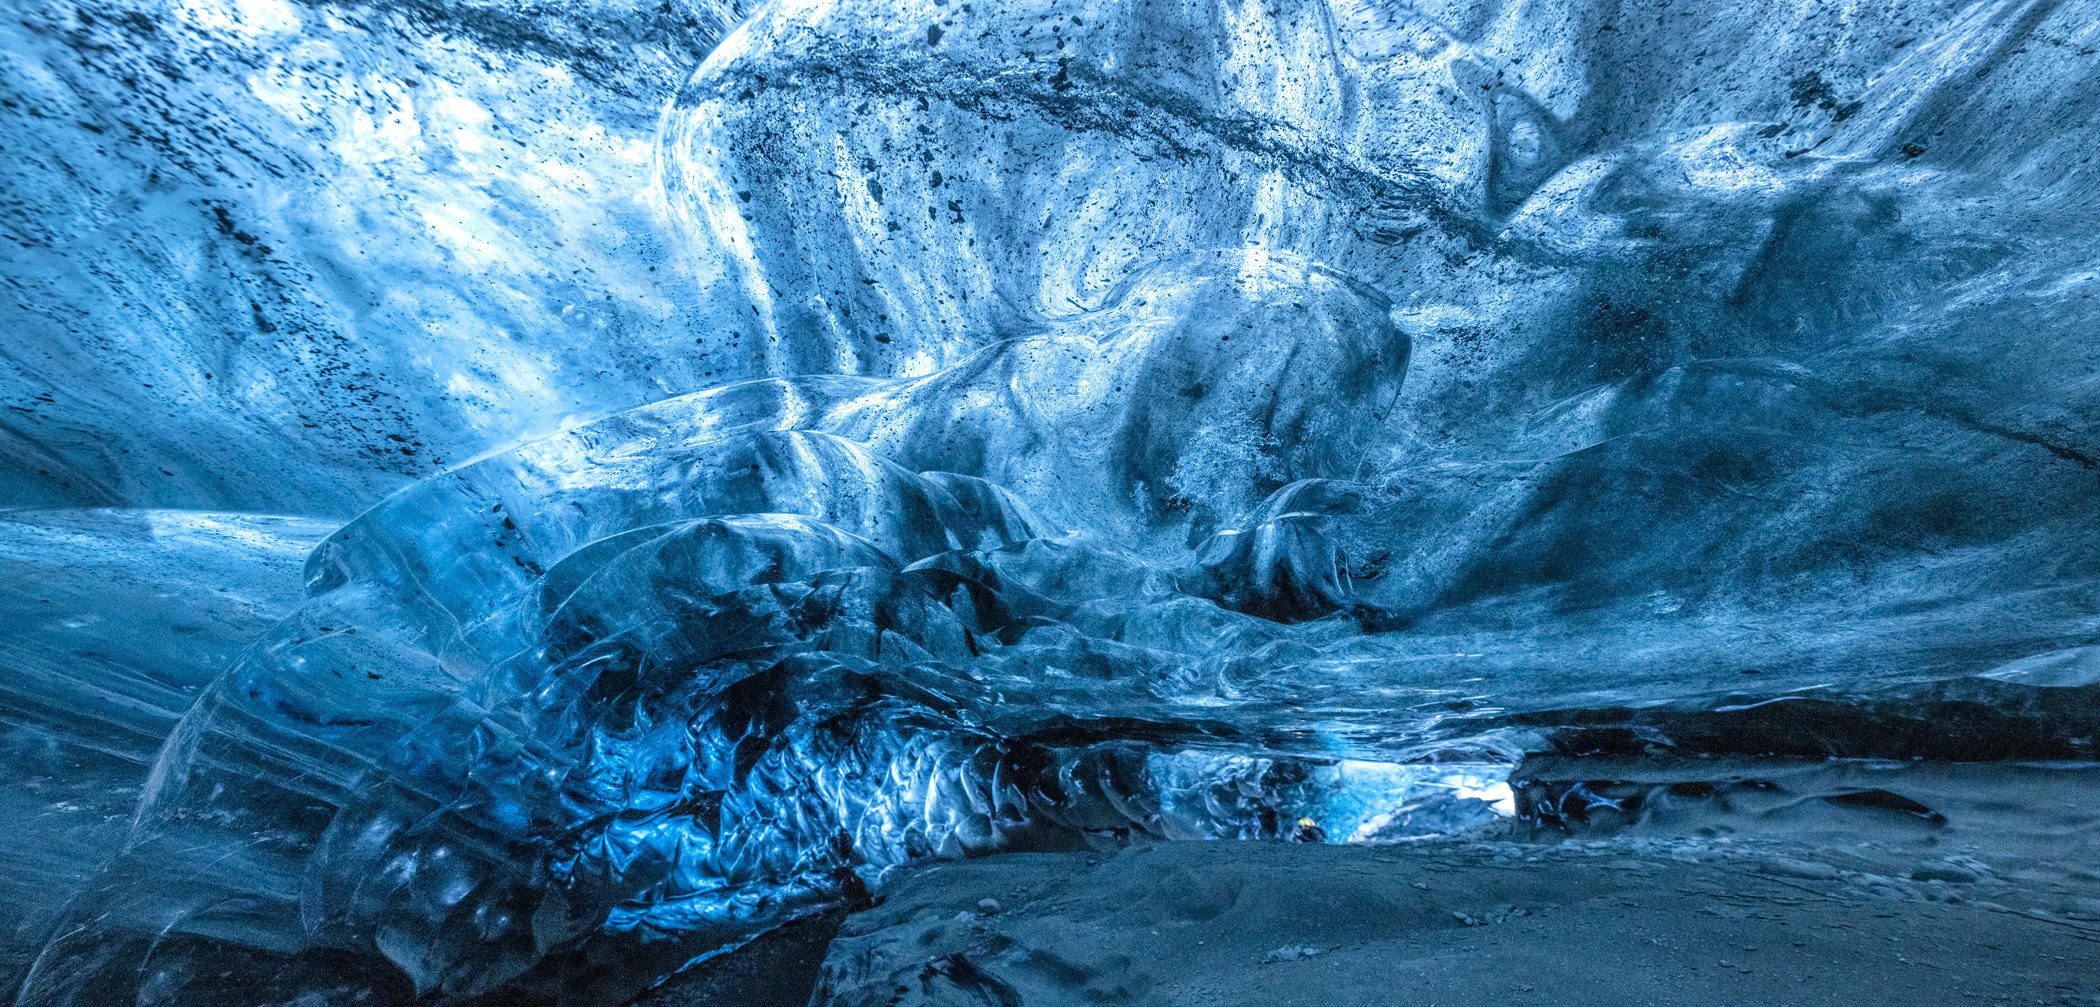 Blue Ice Cave In Winter Jim Zuckerman Photography Photo Tours